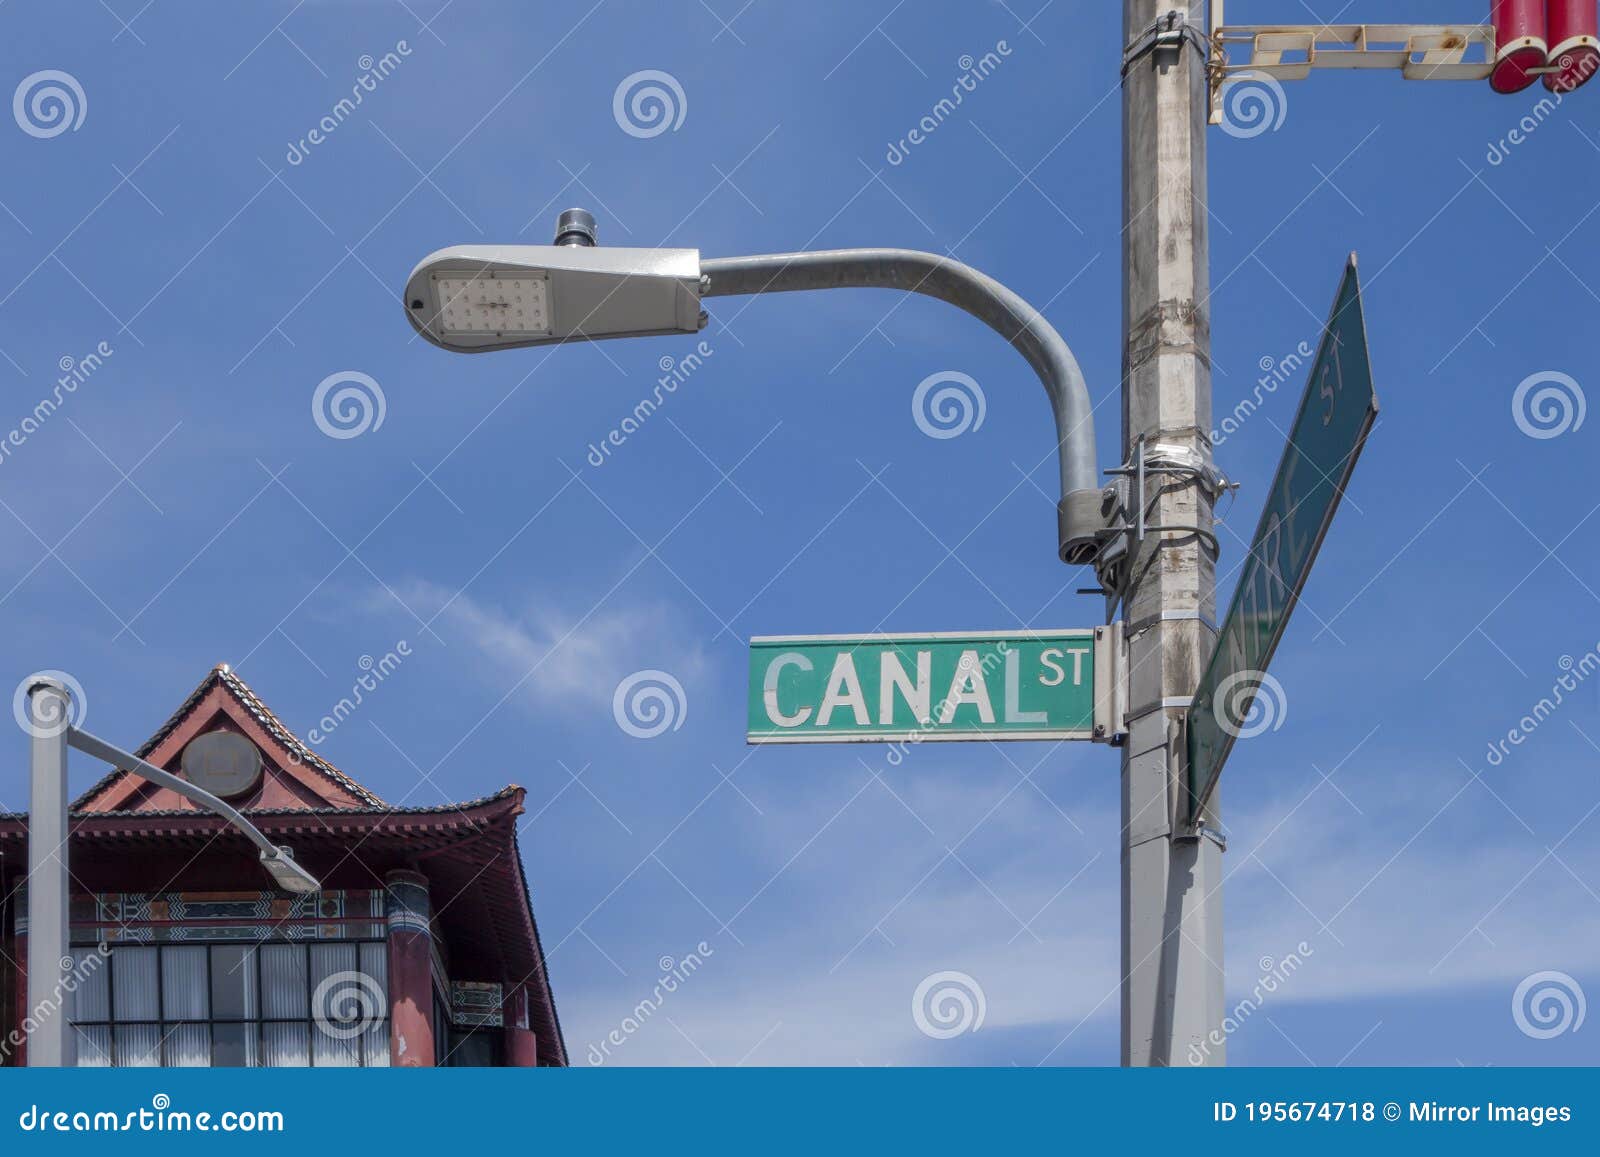 canal street sign in manhattan nyc chinatown